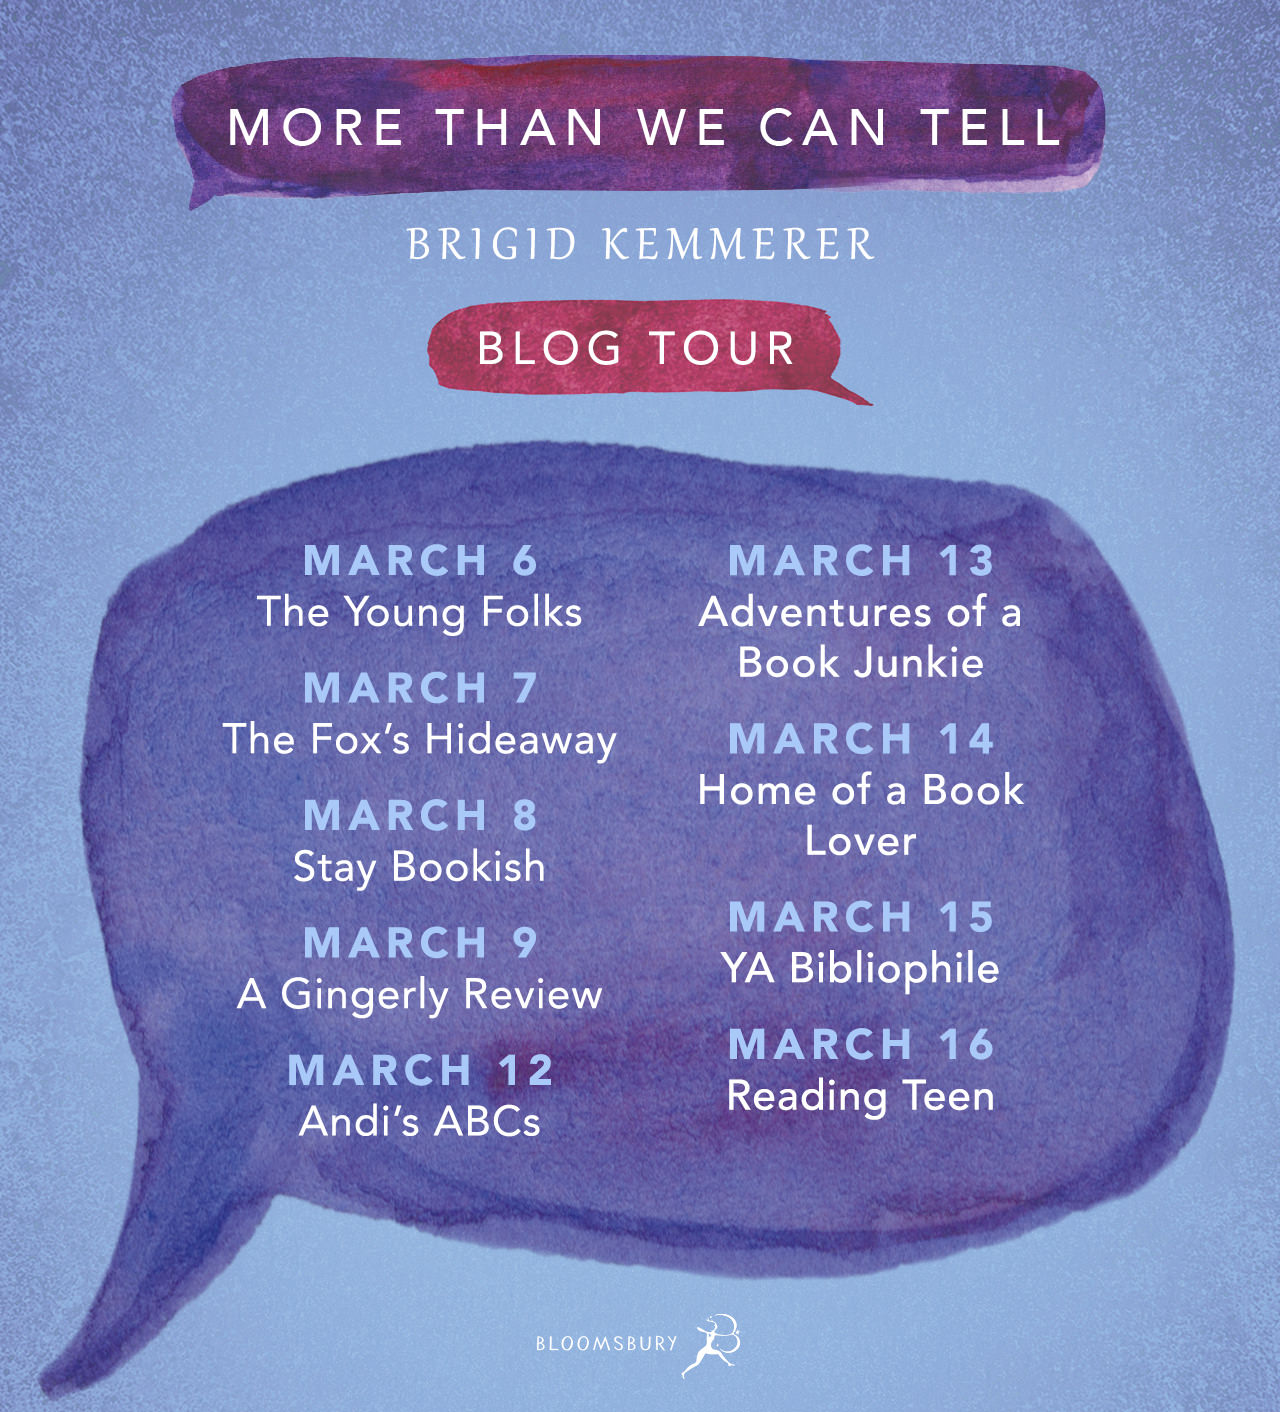 MORE THAN WE CAN TELL blog tour